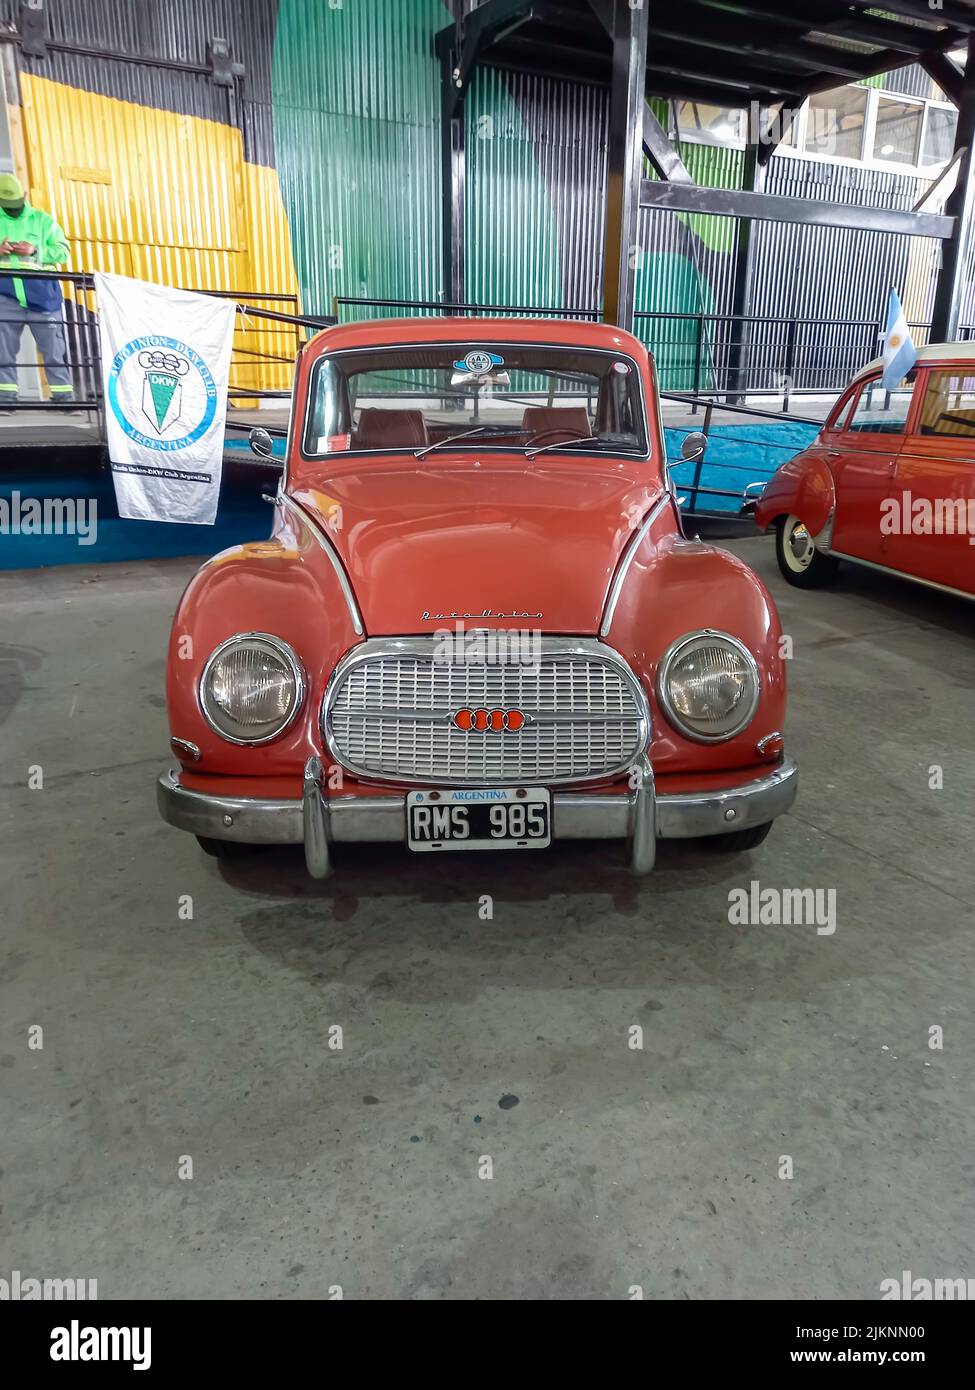 Avellaneda, Argentina - Apr 3, 2022: Old orange Auto Union DKW 1000 S four door saloon 1960-1970 parked in a warehouse yard. Front view. Classic car s Stock Photo